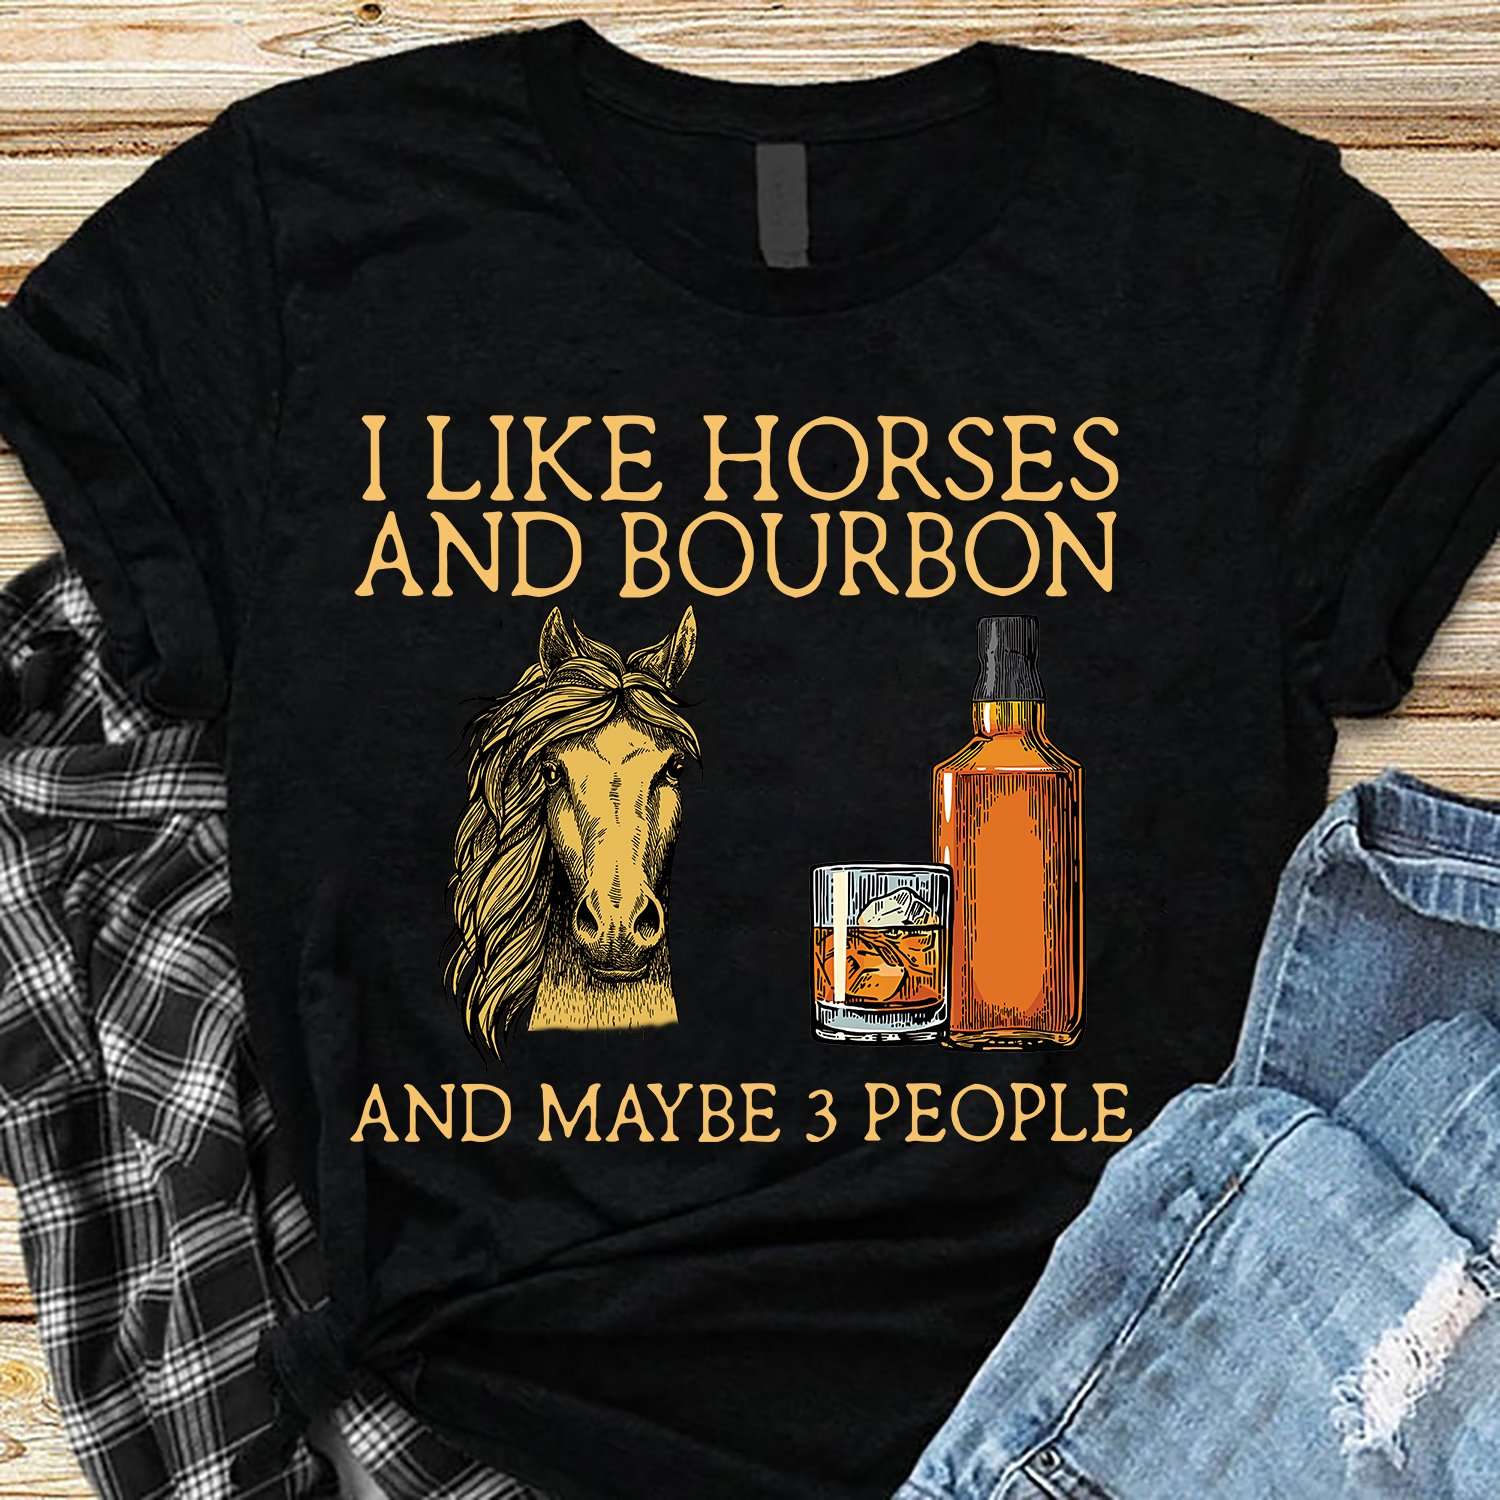 I like horses and bourbon and maybe 3 people - Bourbon wine, horses lover